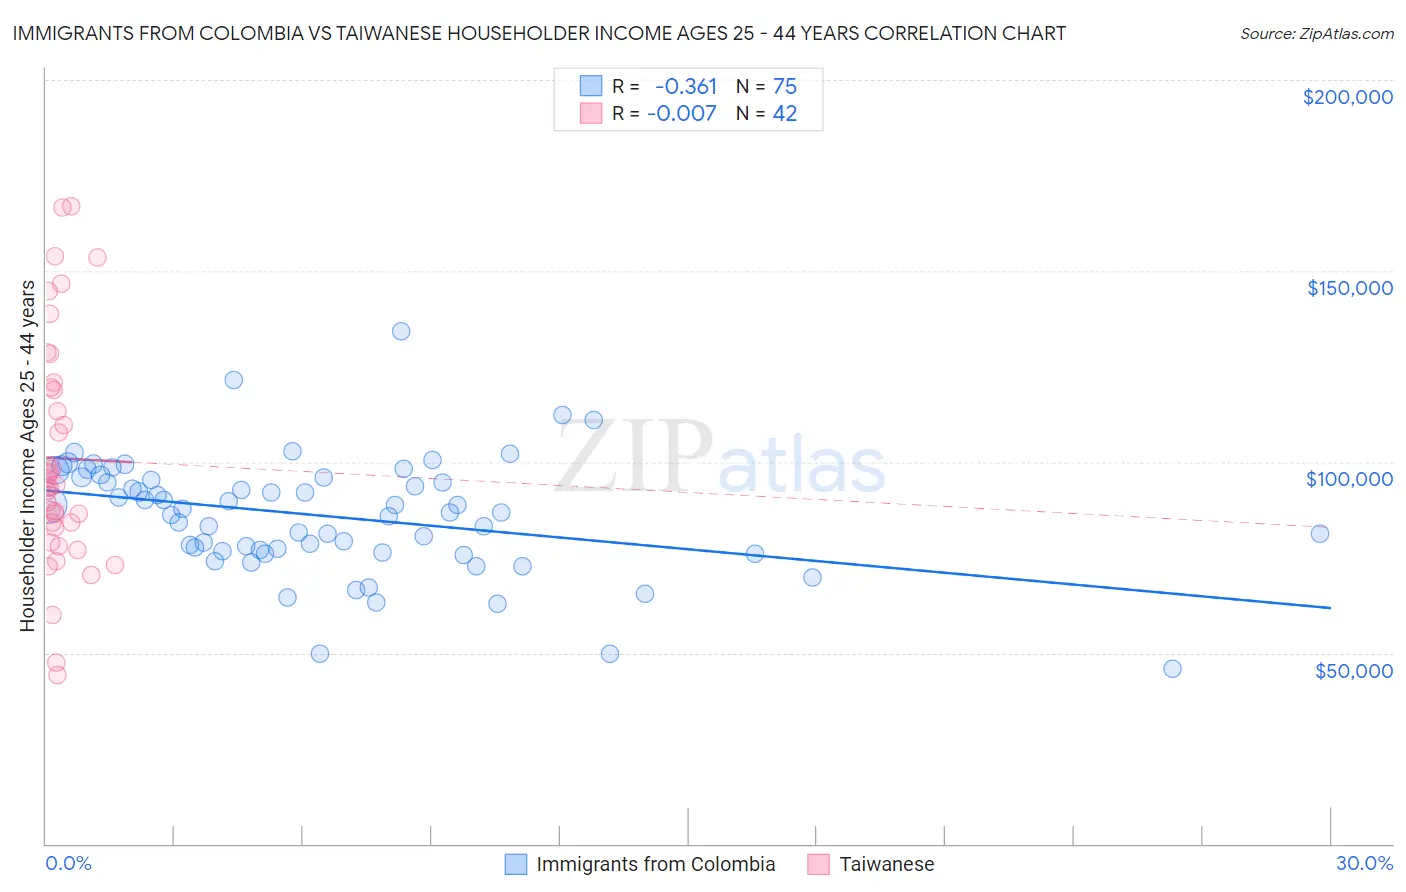 Immigrants from Colombia vs Taiwanese Householder Income Ages 25 - 44 years